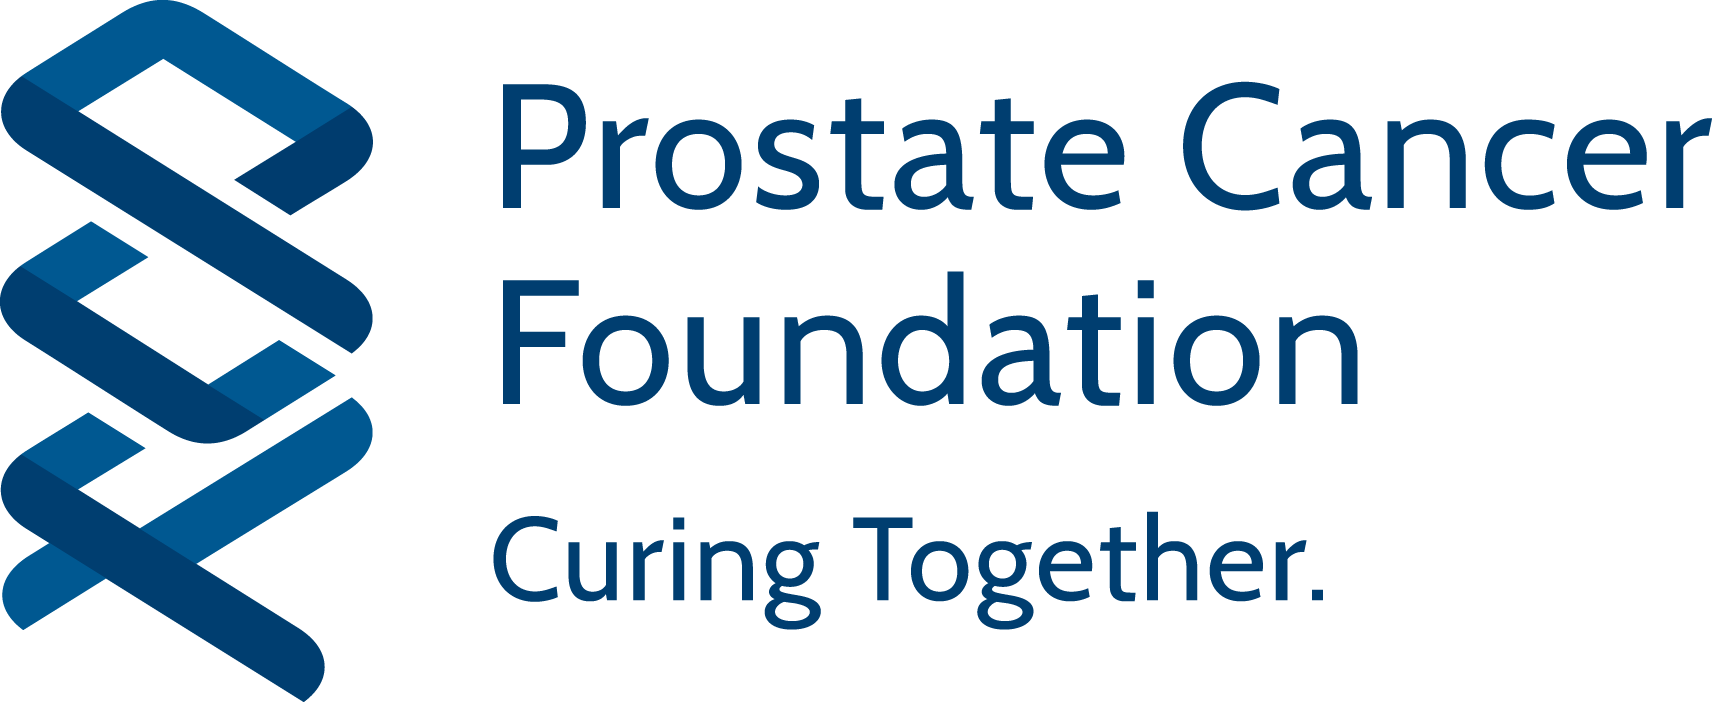 Prostate Cancer Foundation Curing Together. The Prostate Cancer Foundation funds the world’s most promising research to improve the prevention, detection, and treatment of prostate cancer and ultimately cure it for good